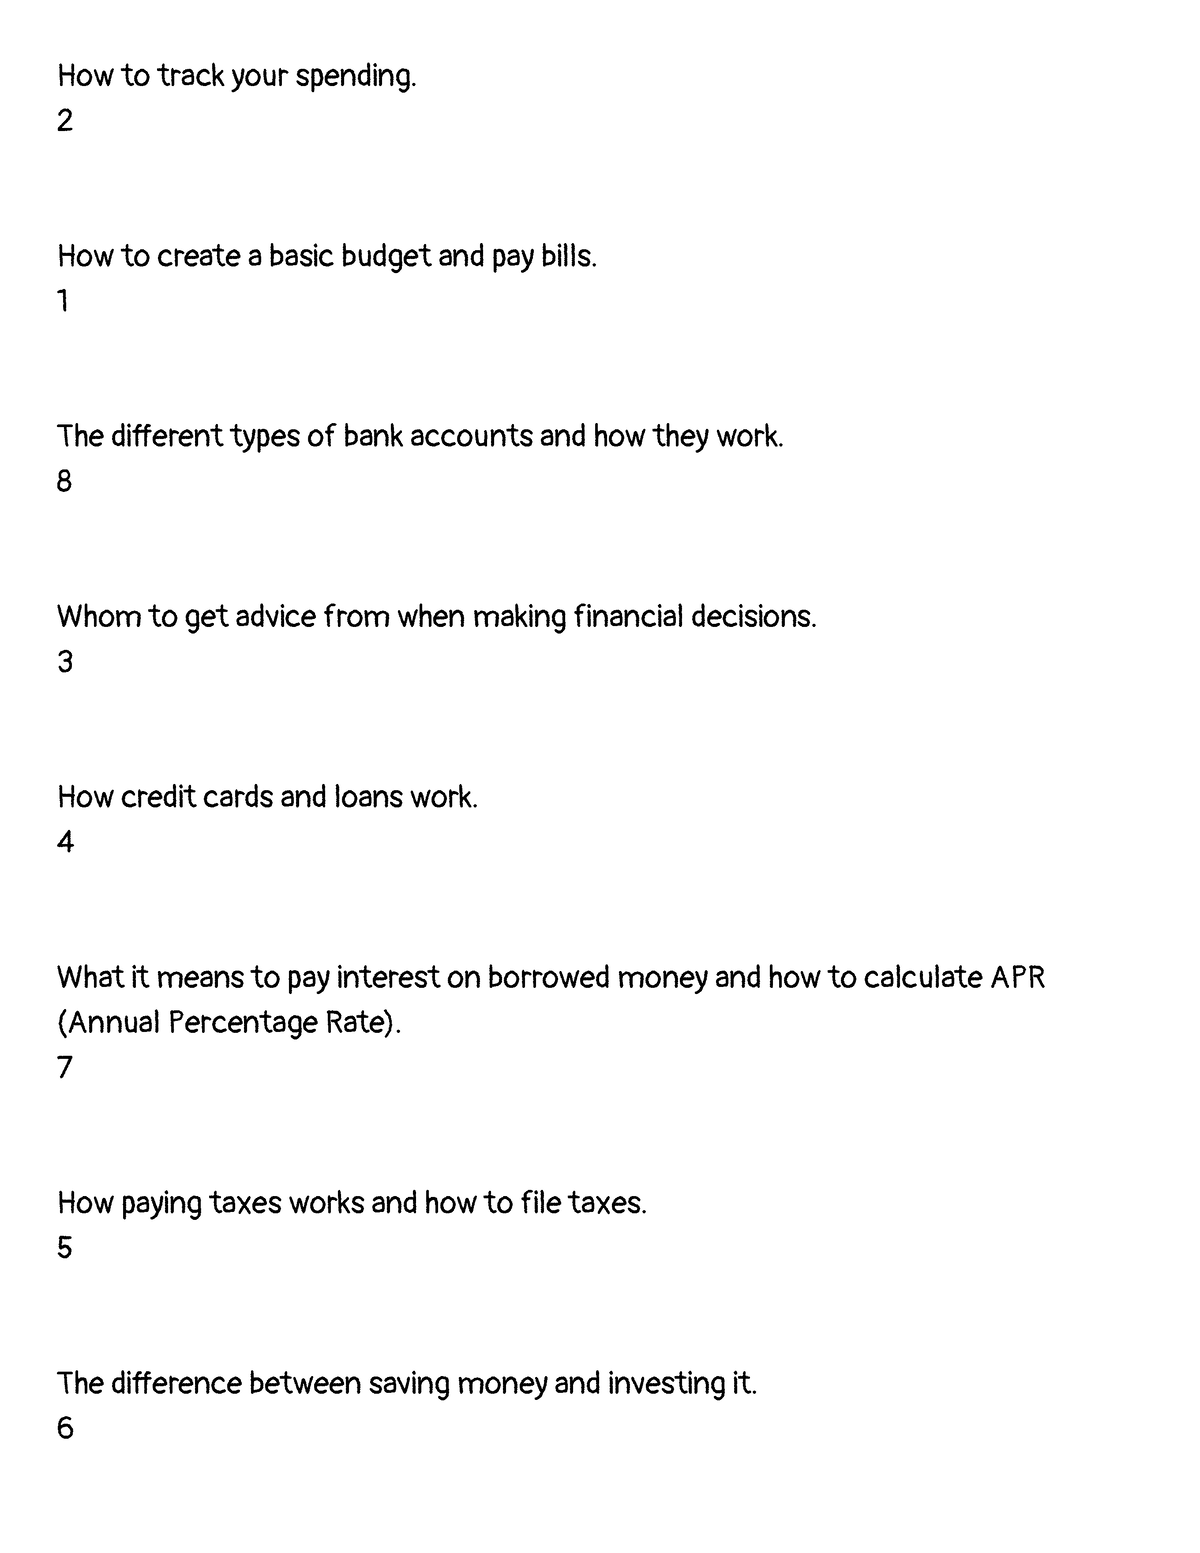 financial-literacy-sorting-statements-austria-docx-how-to-track